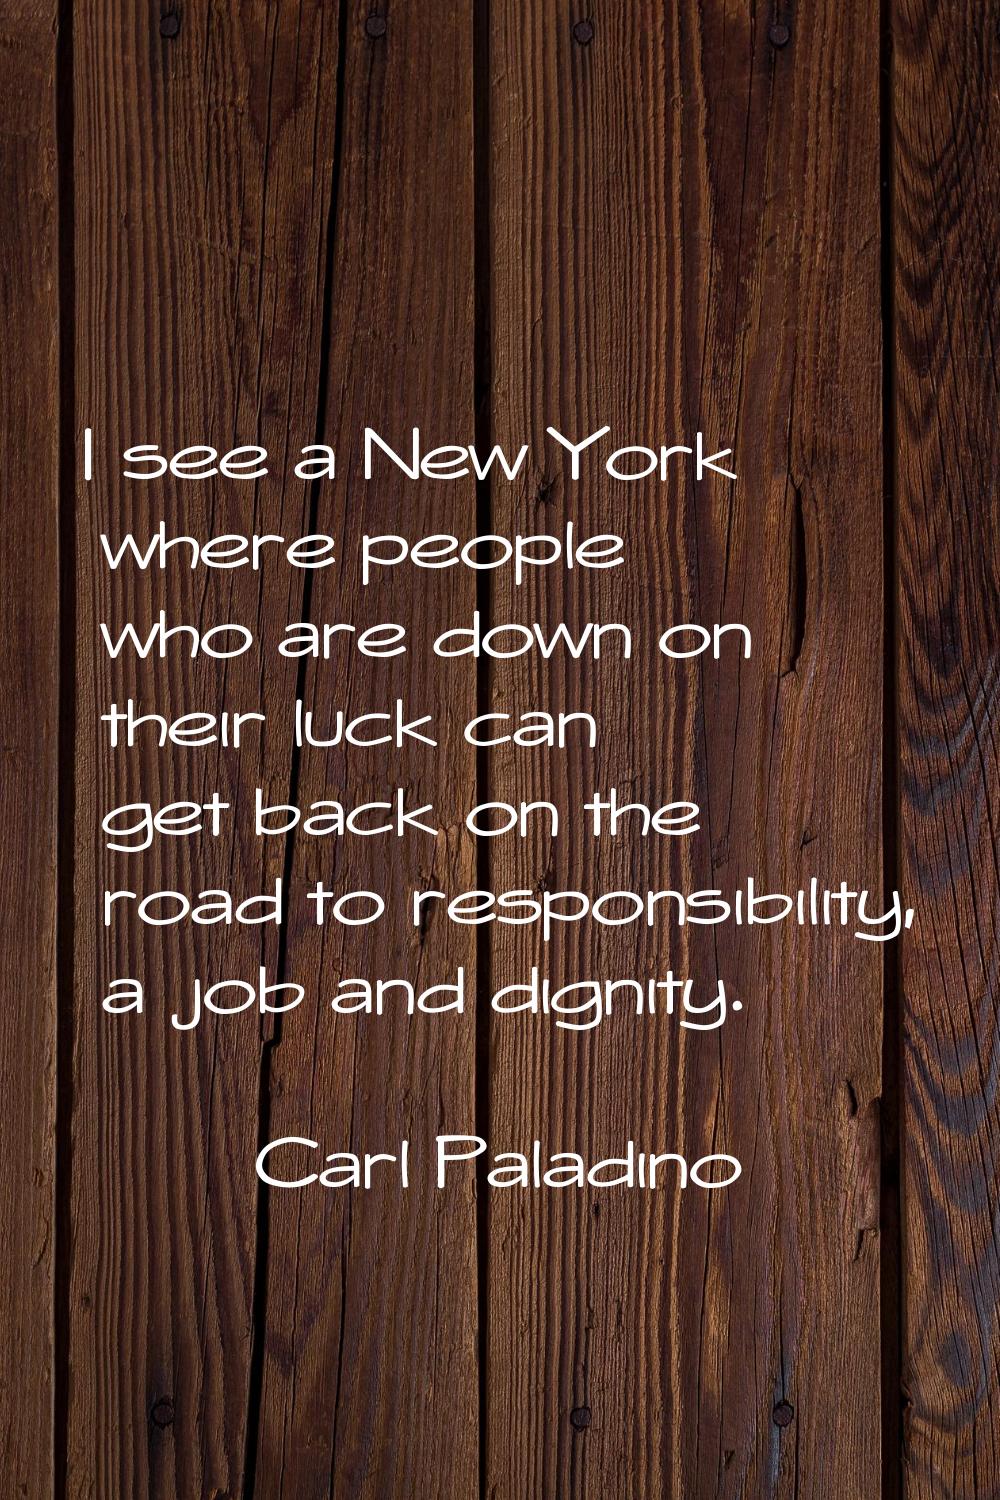 I see a New York where people who are down on their luck can get back on the road to responsibility